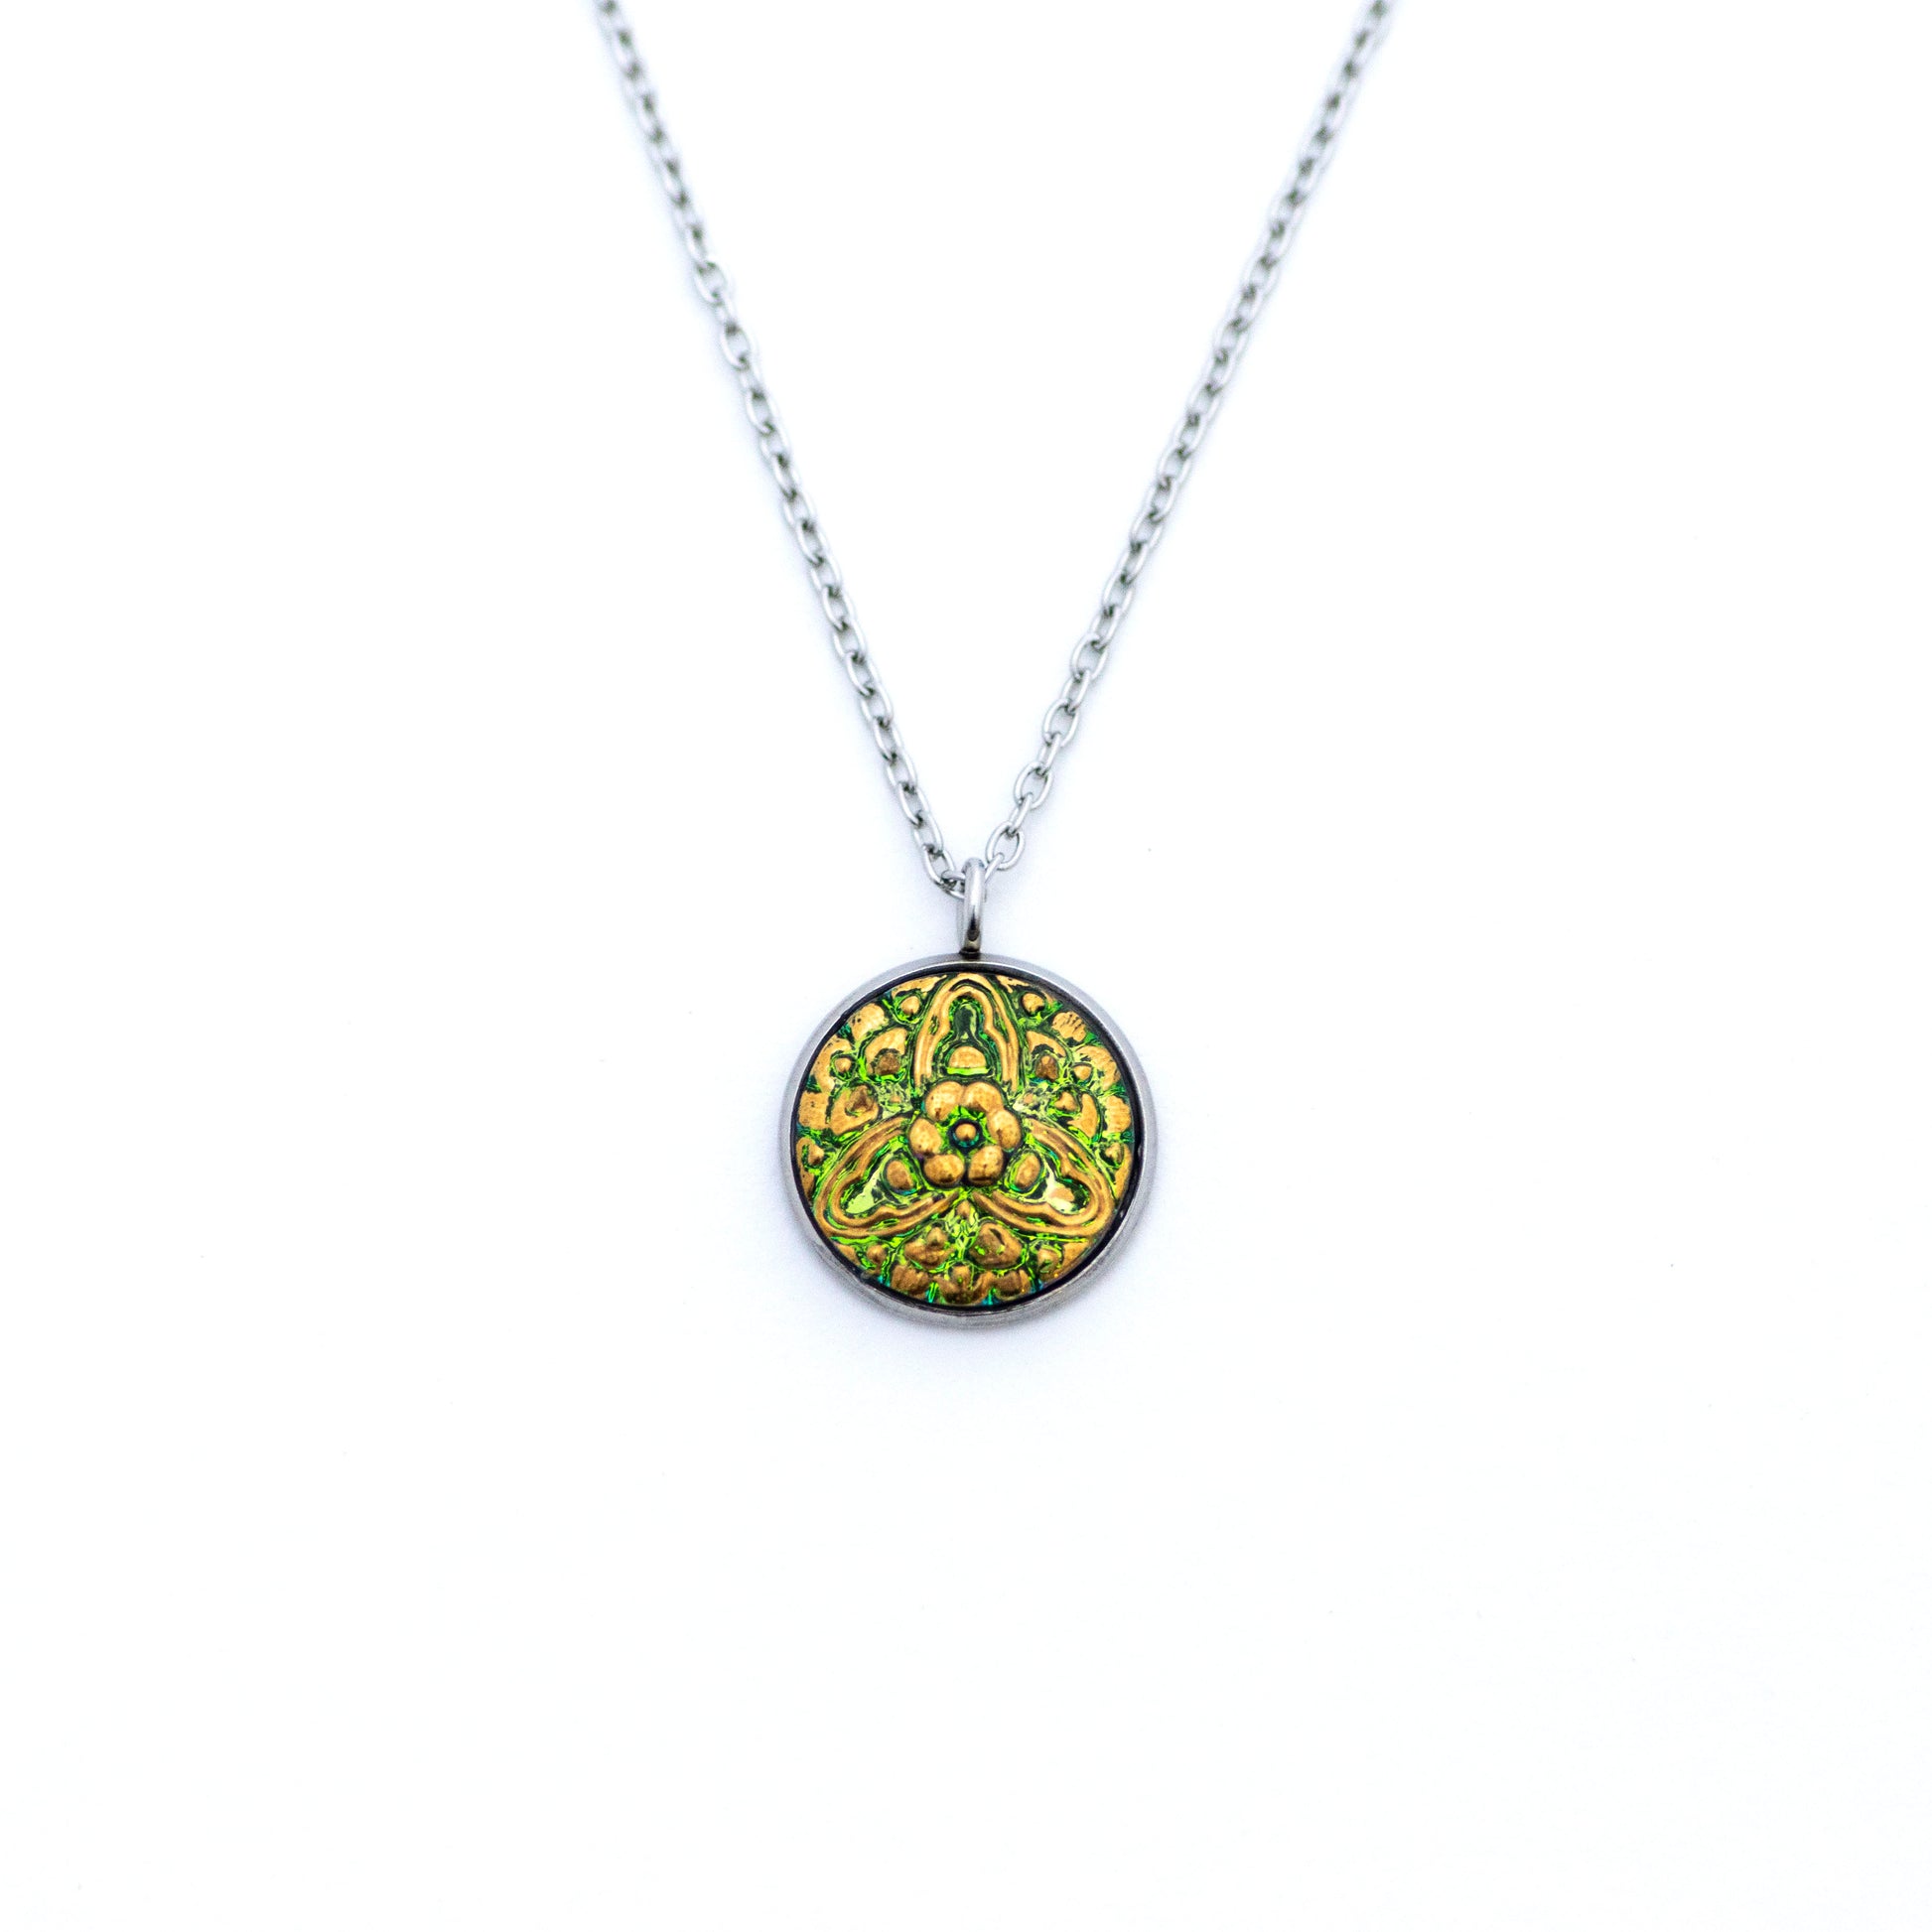 Green and gold painted Czech glass button with 3 point floral motif. Button pendant necklace.